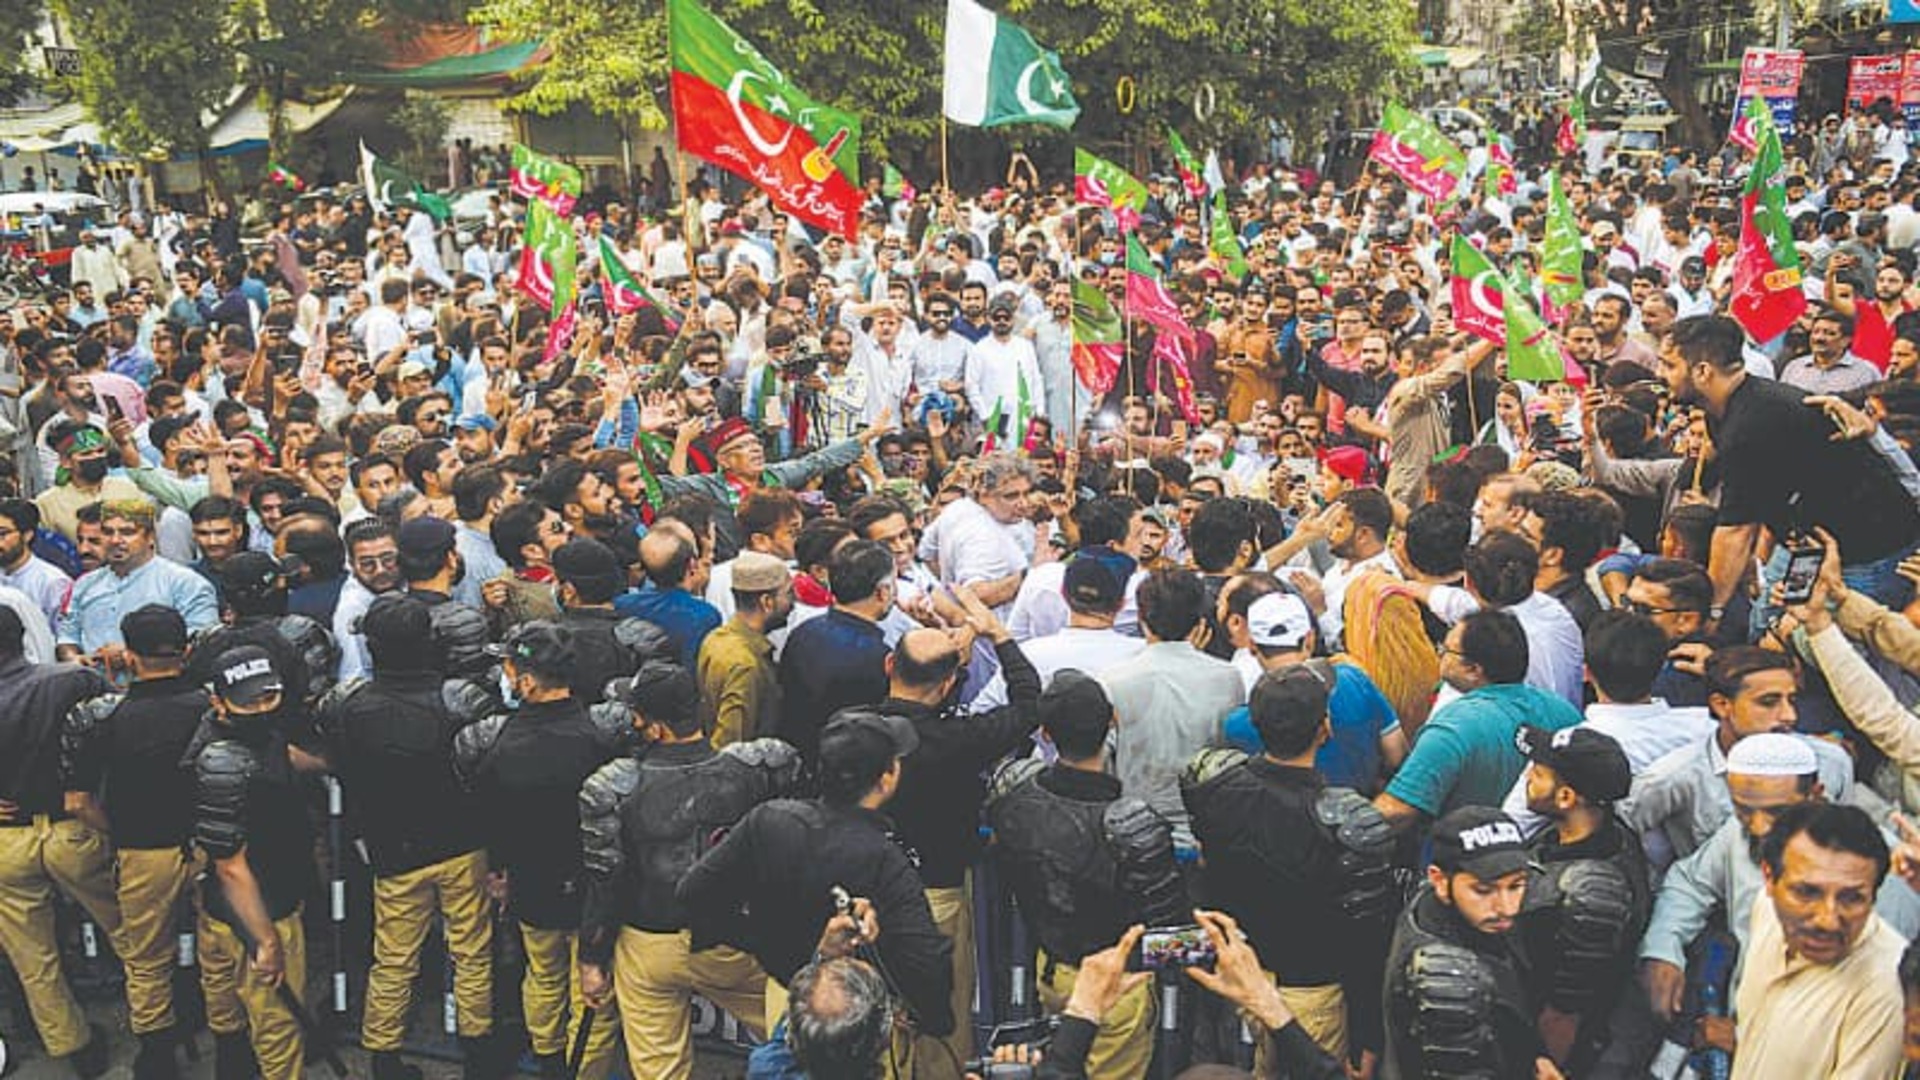 Protesters Held For Going Against electoral malpractice, says PTI